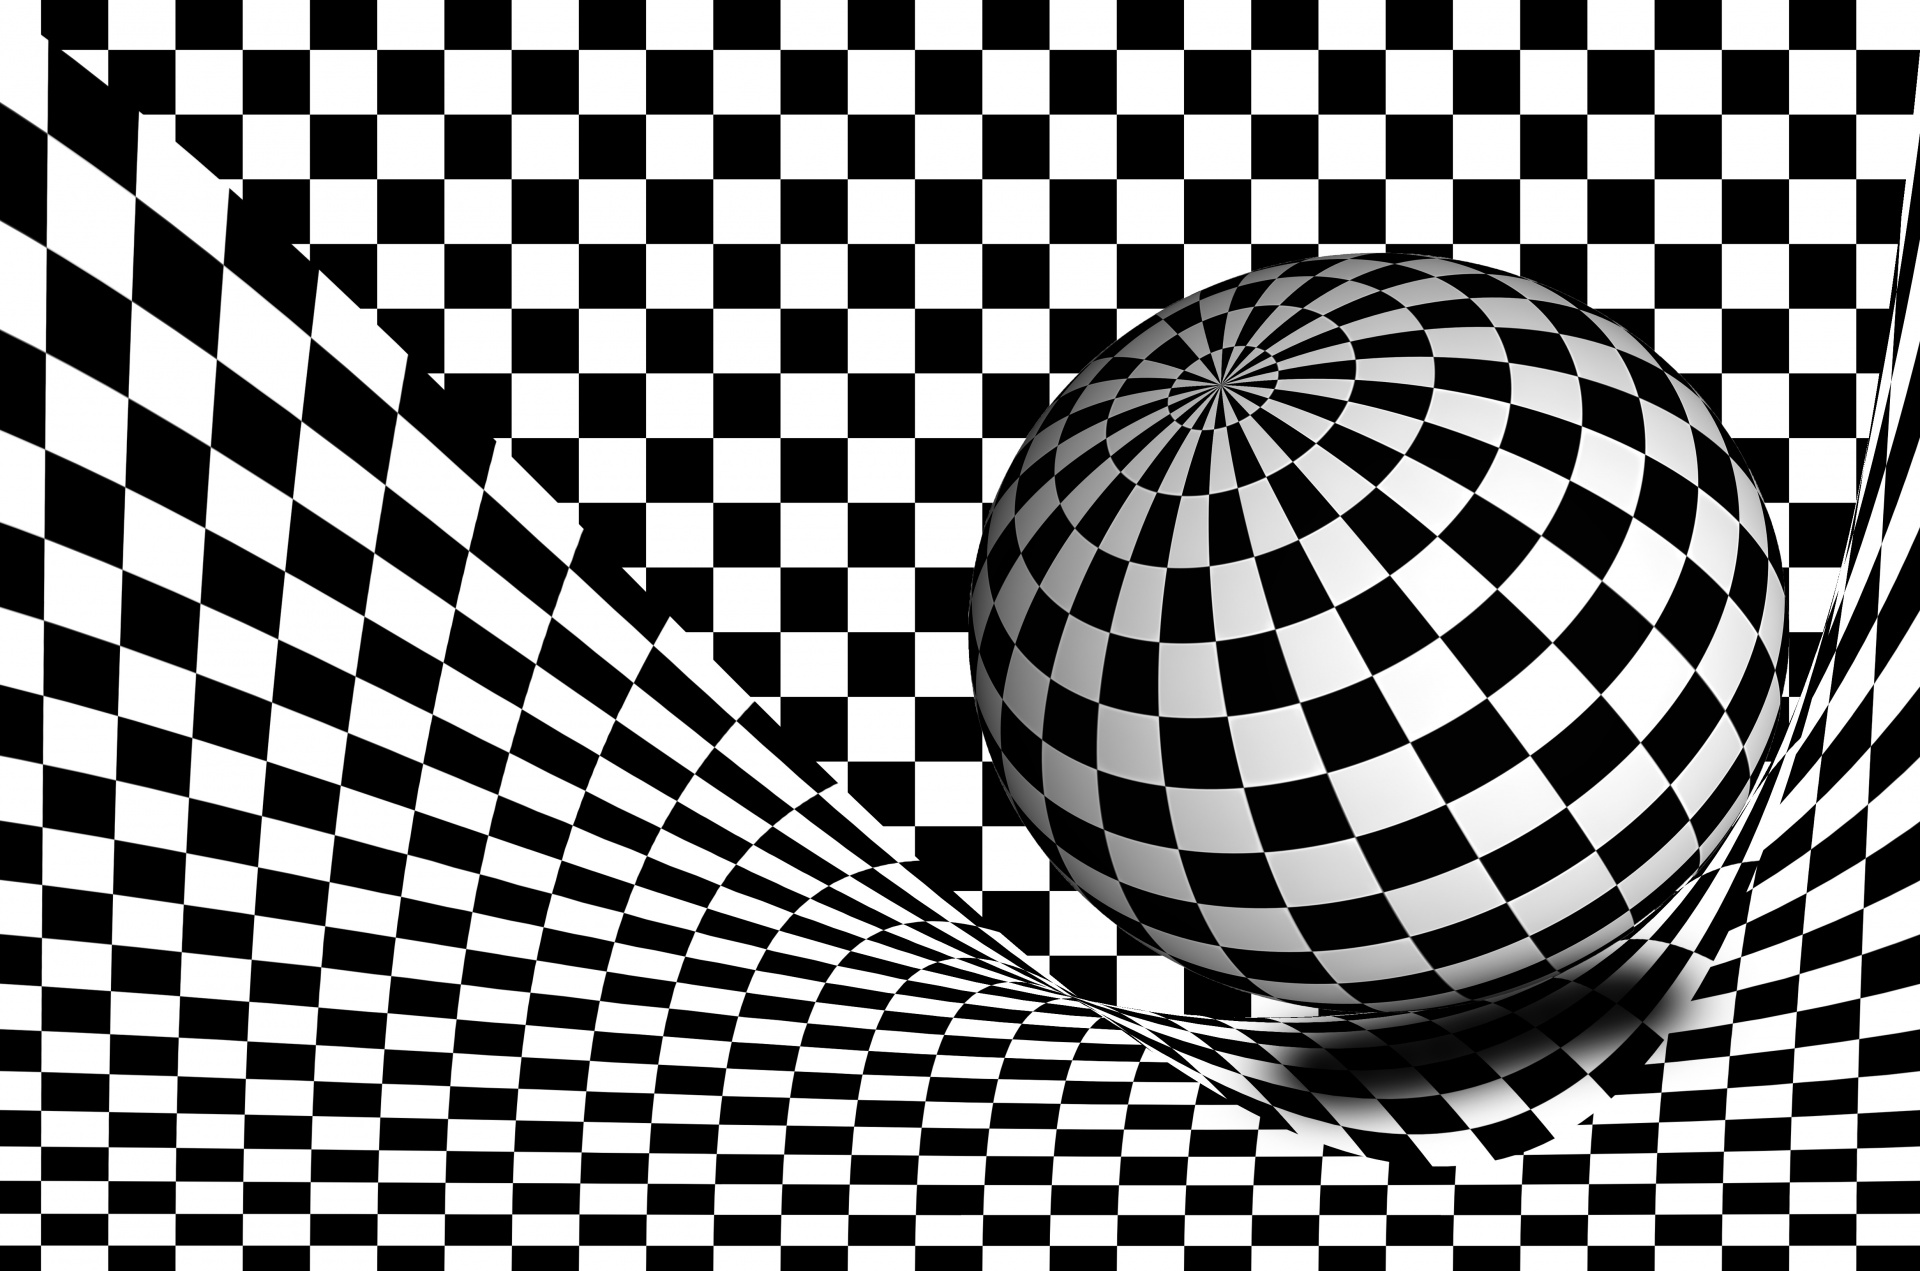 3D Sphere with Mapped Checkerboard illustration